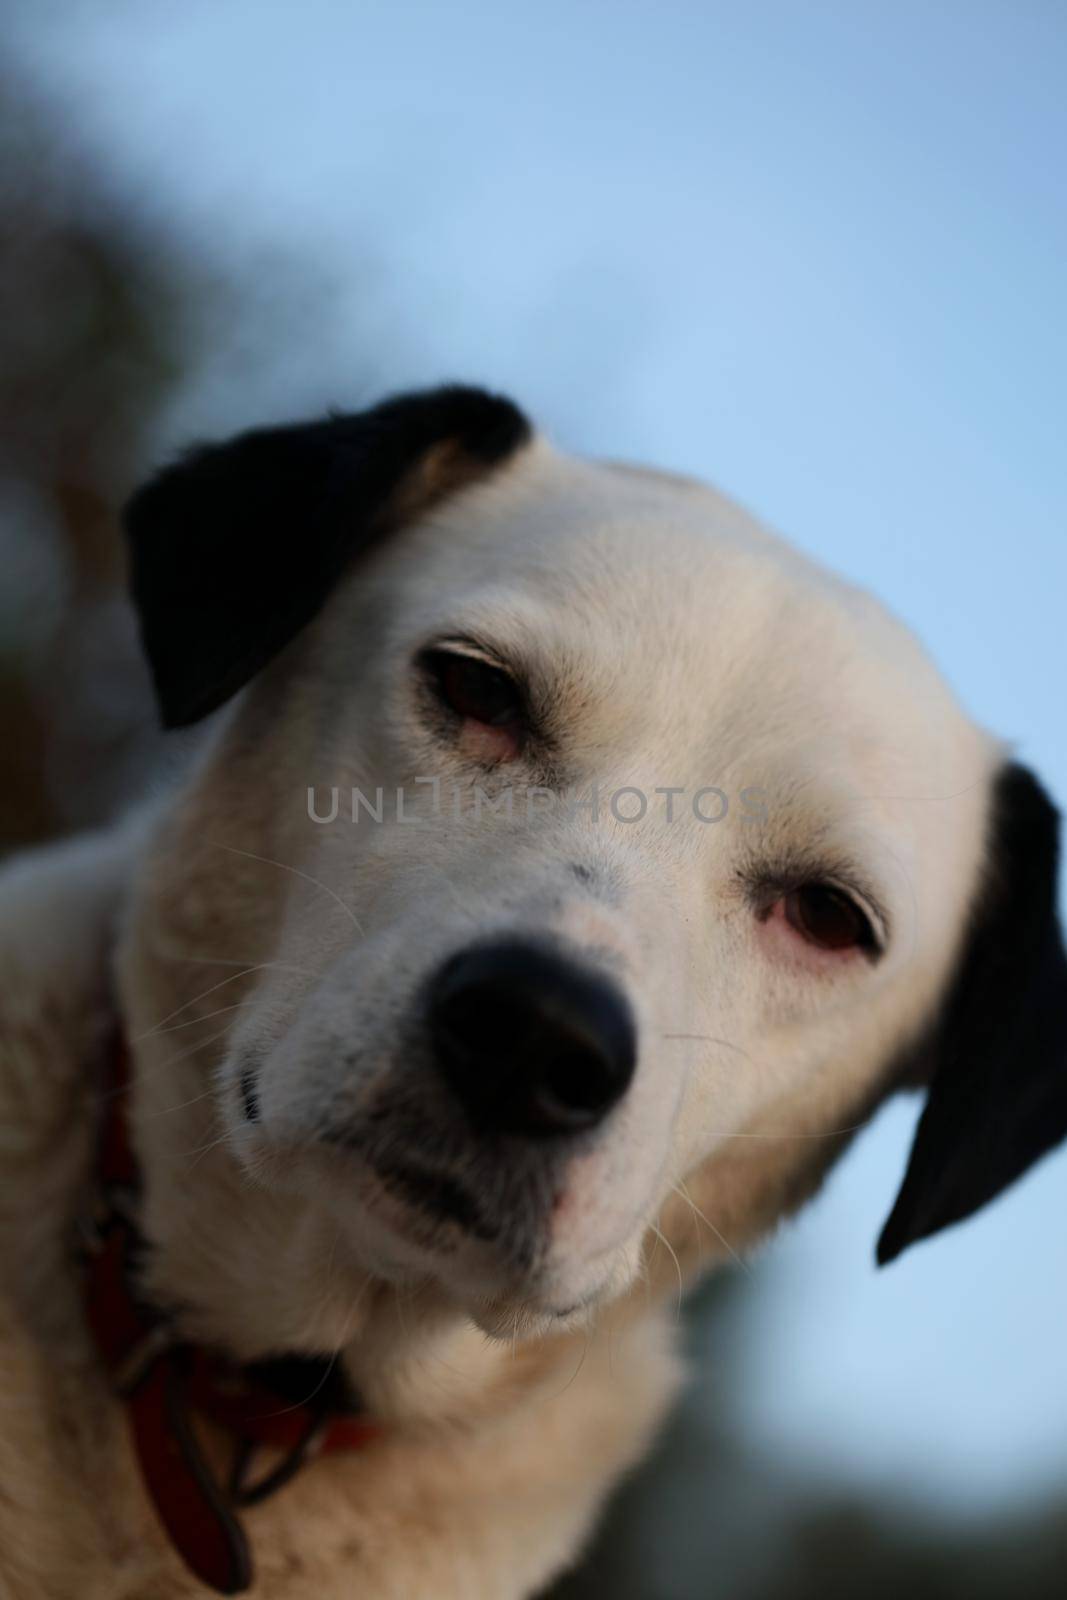 Cute white and black dog profile close up animal background high quality big size instant print by BakalaeroZz